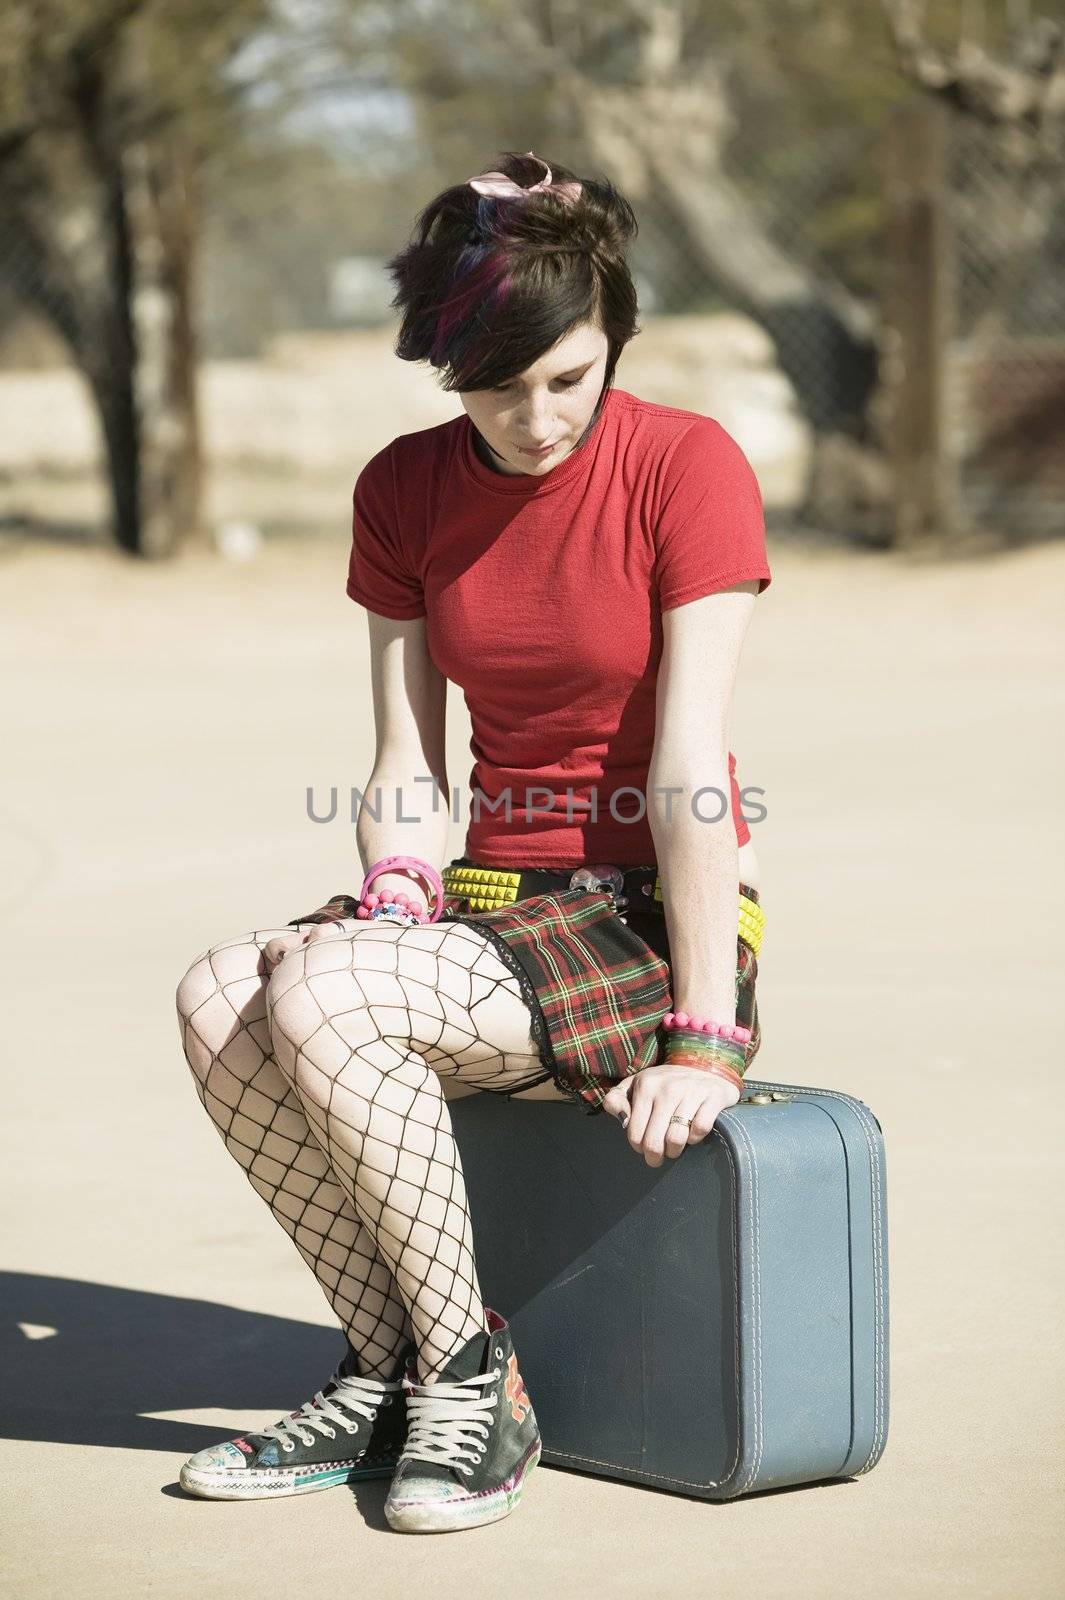 Punk Girl Sitting on a Suitcase on a Cement Playground